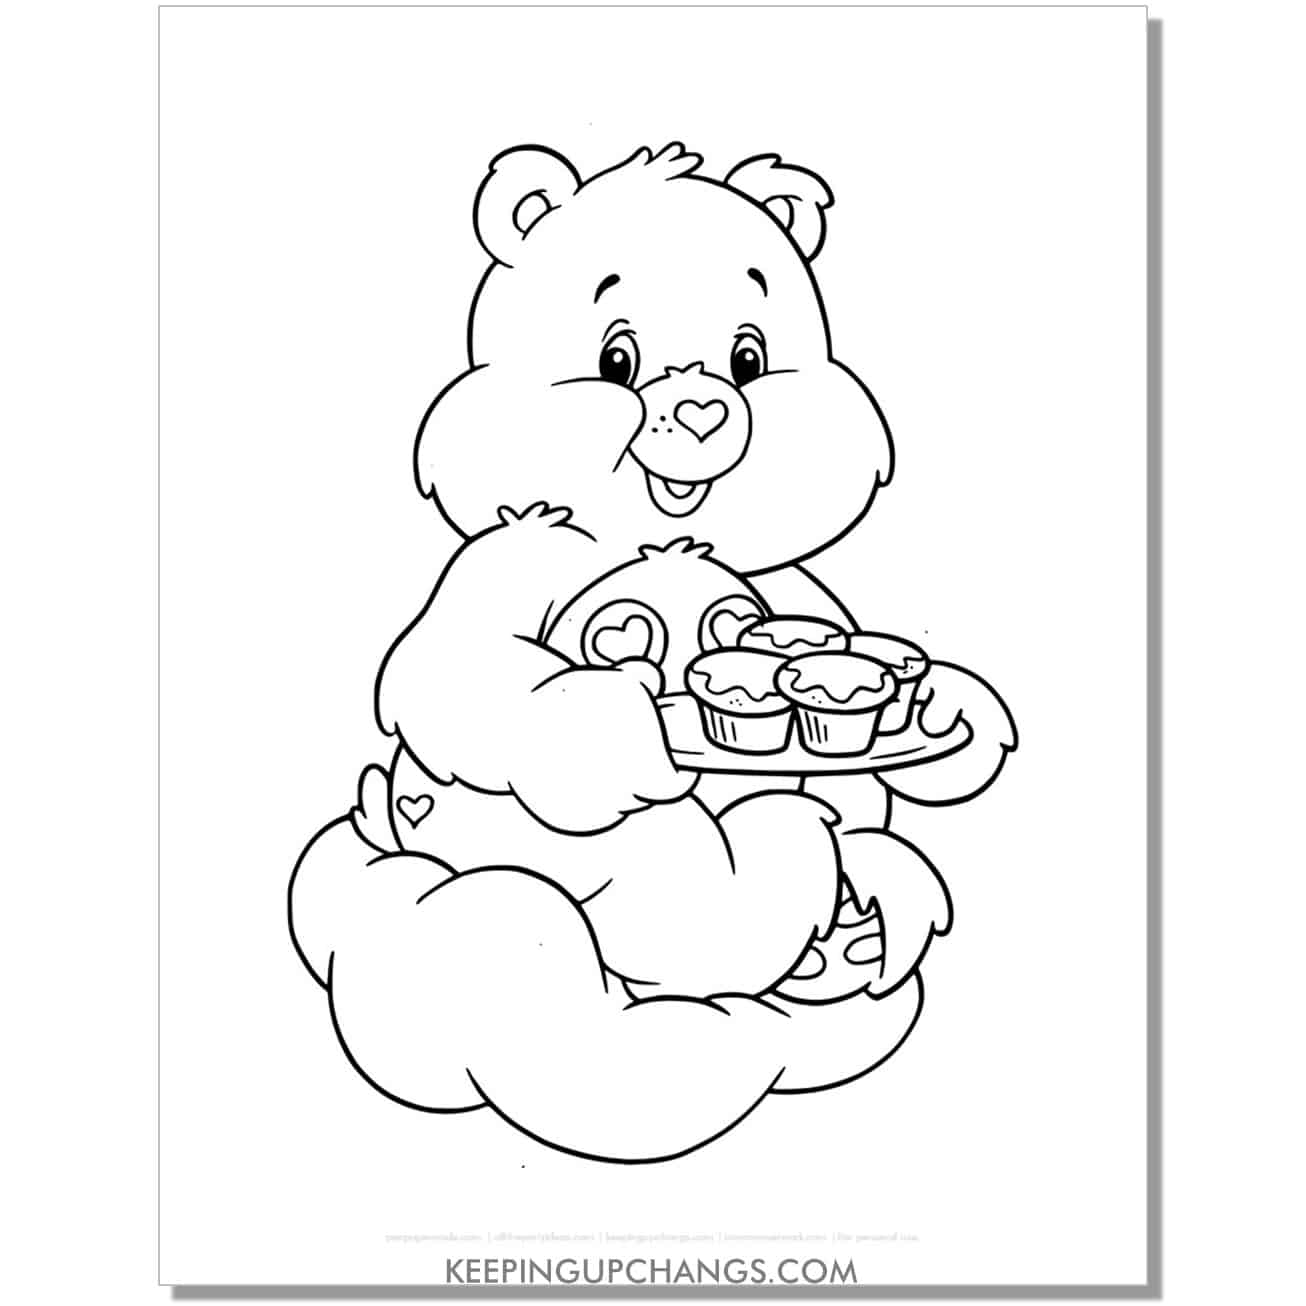 share bear with plate of cupcakes care bear coloring page, sheet.